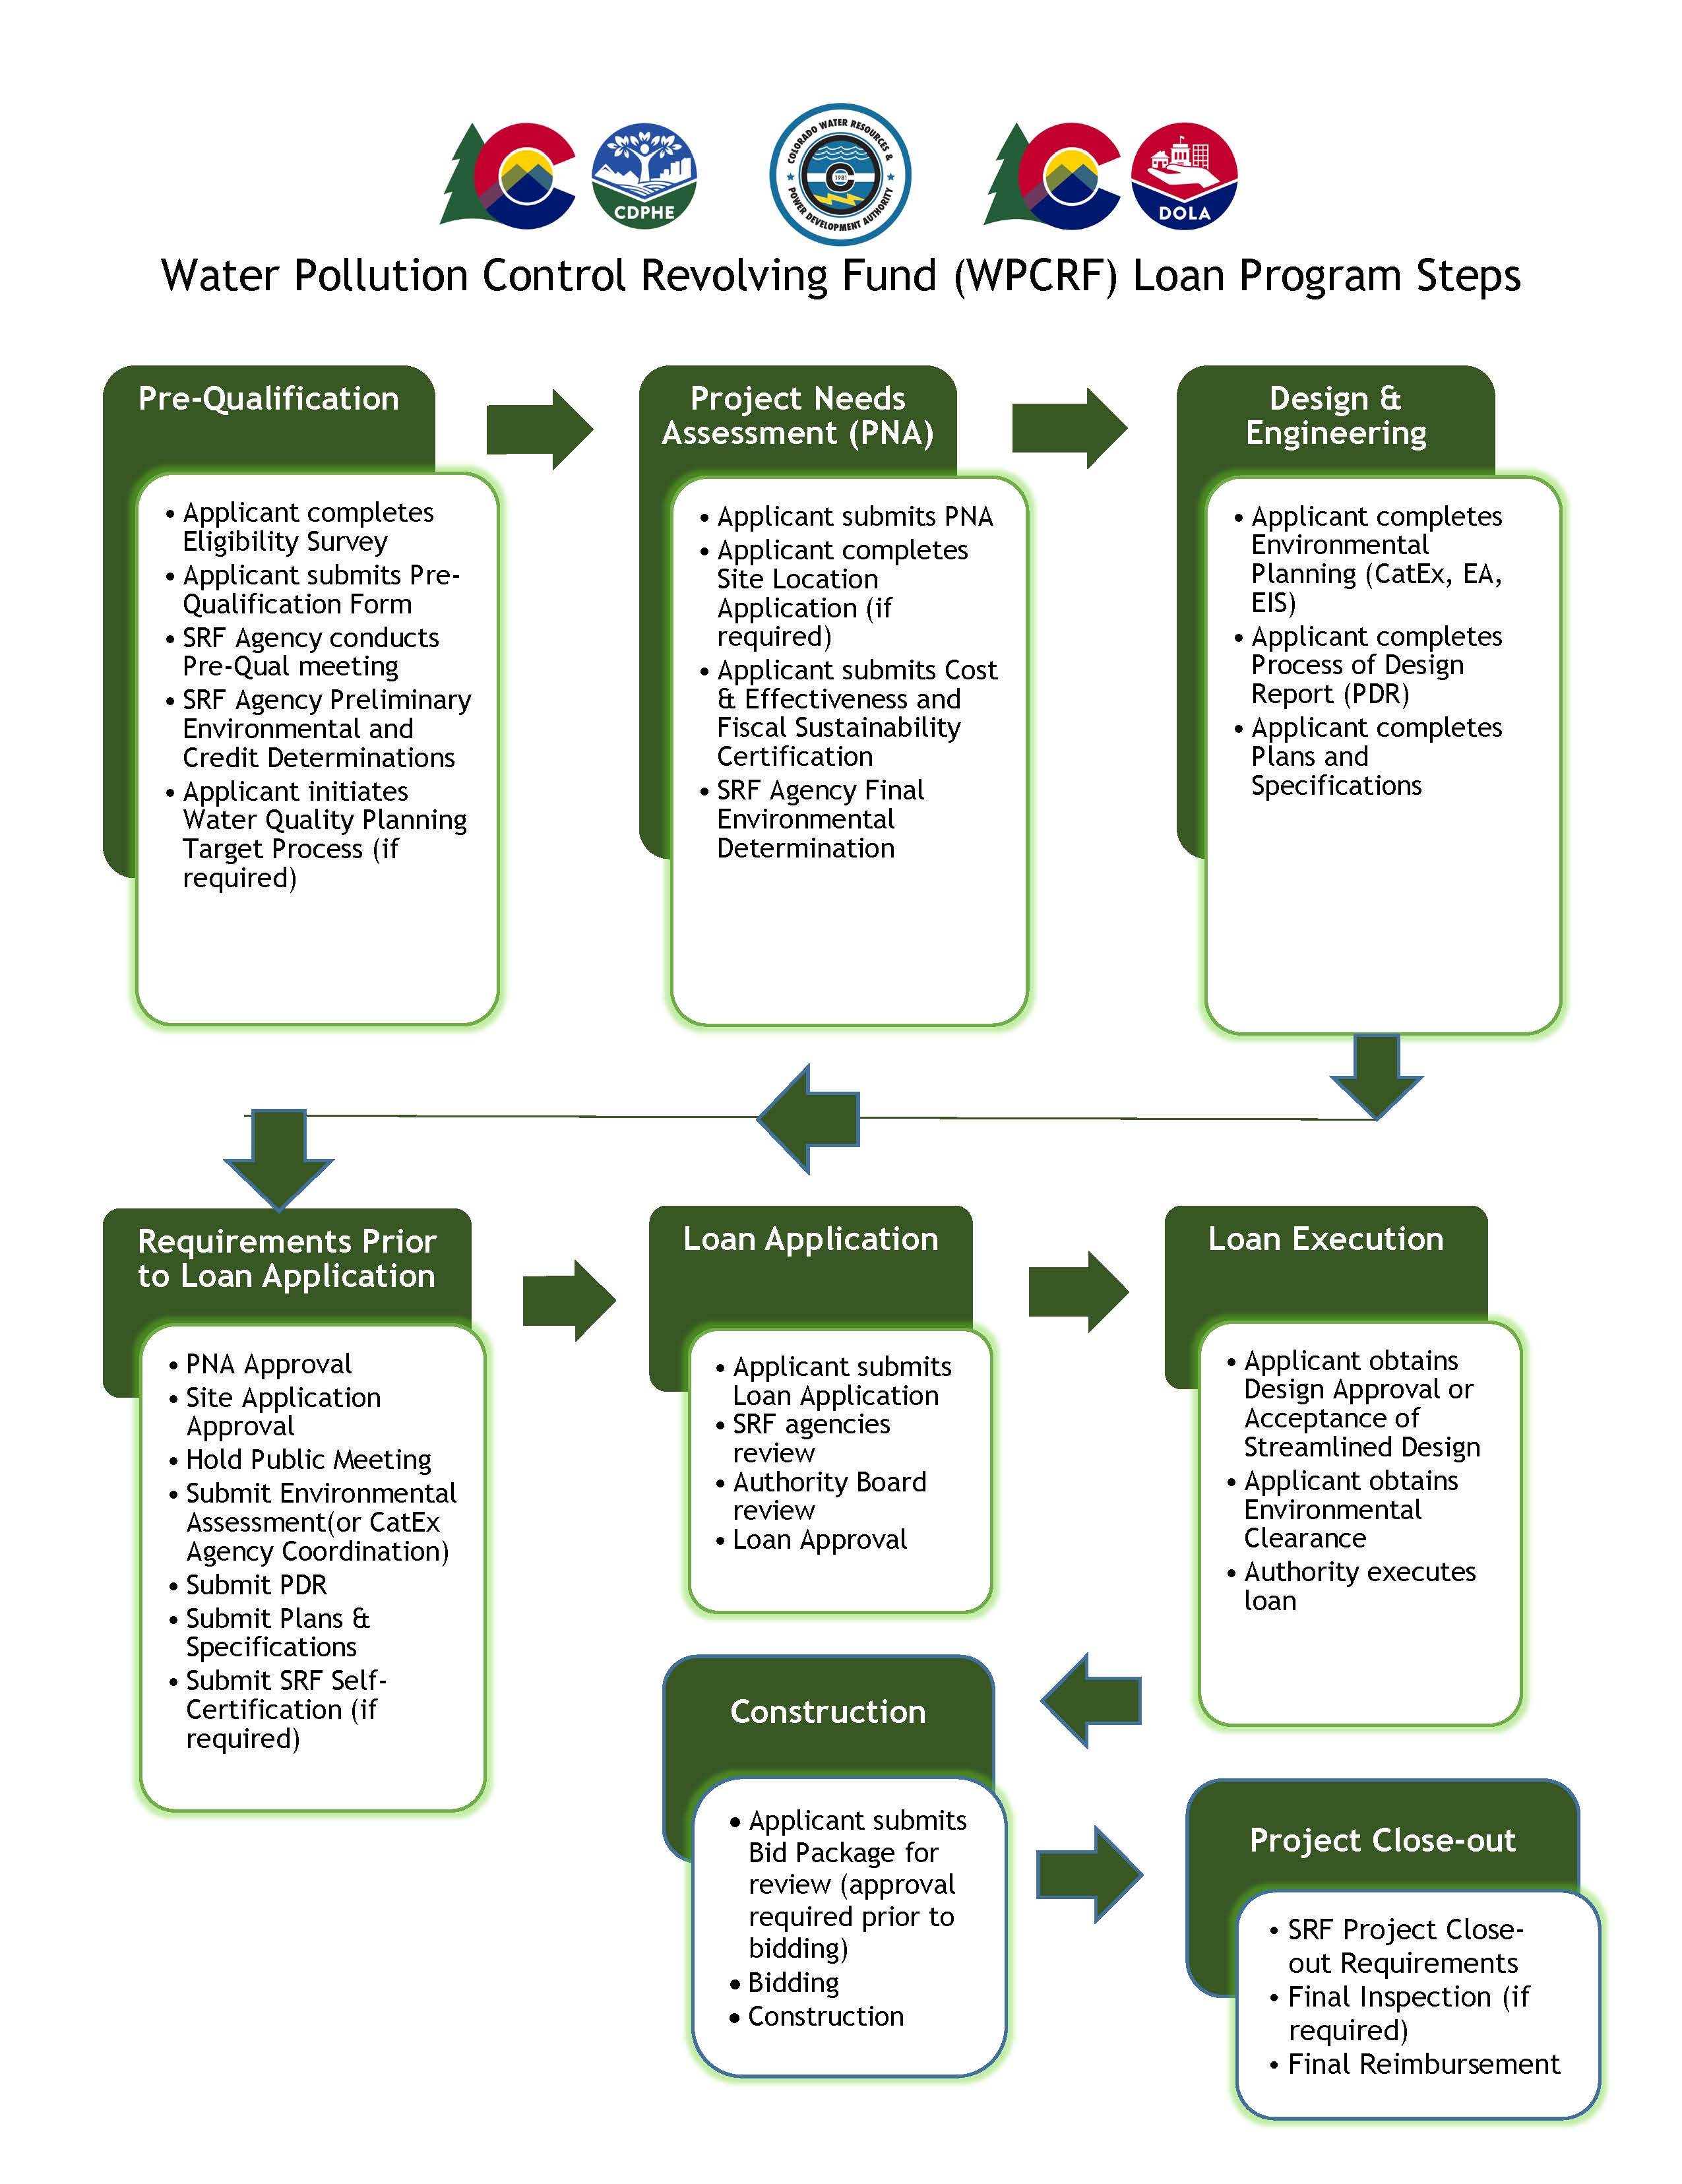 Flow chart: Water pollution control revolving fund loan program steps